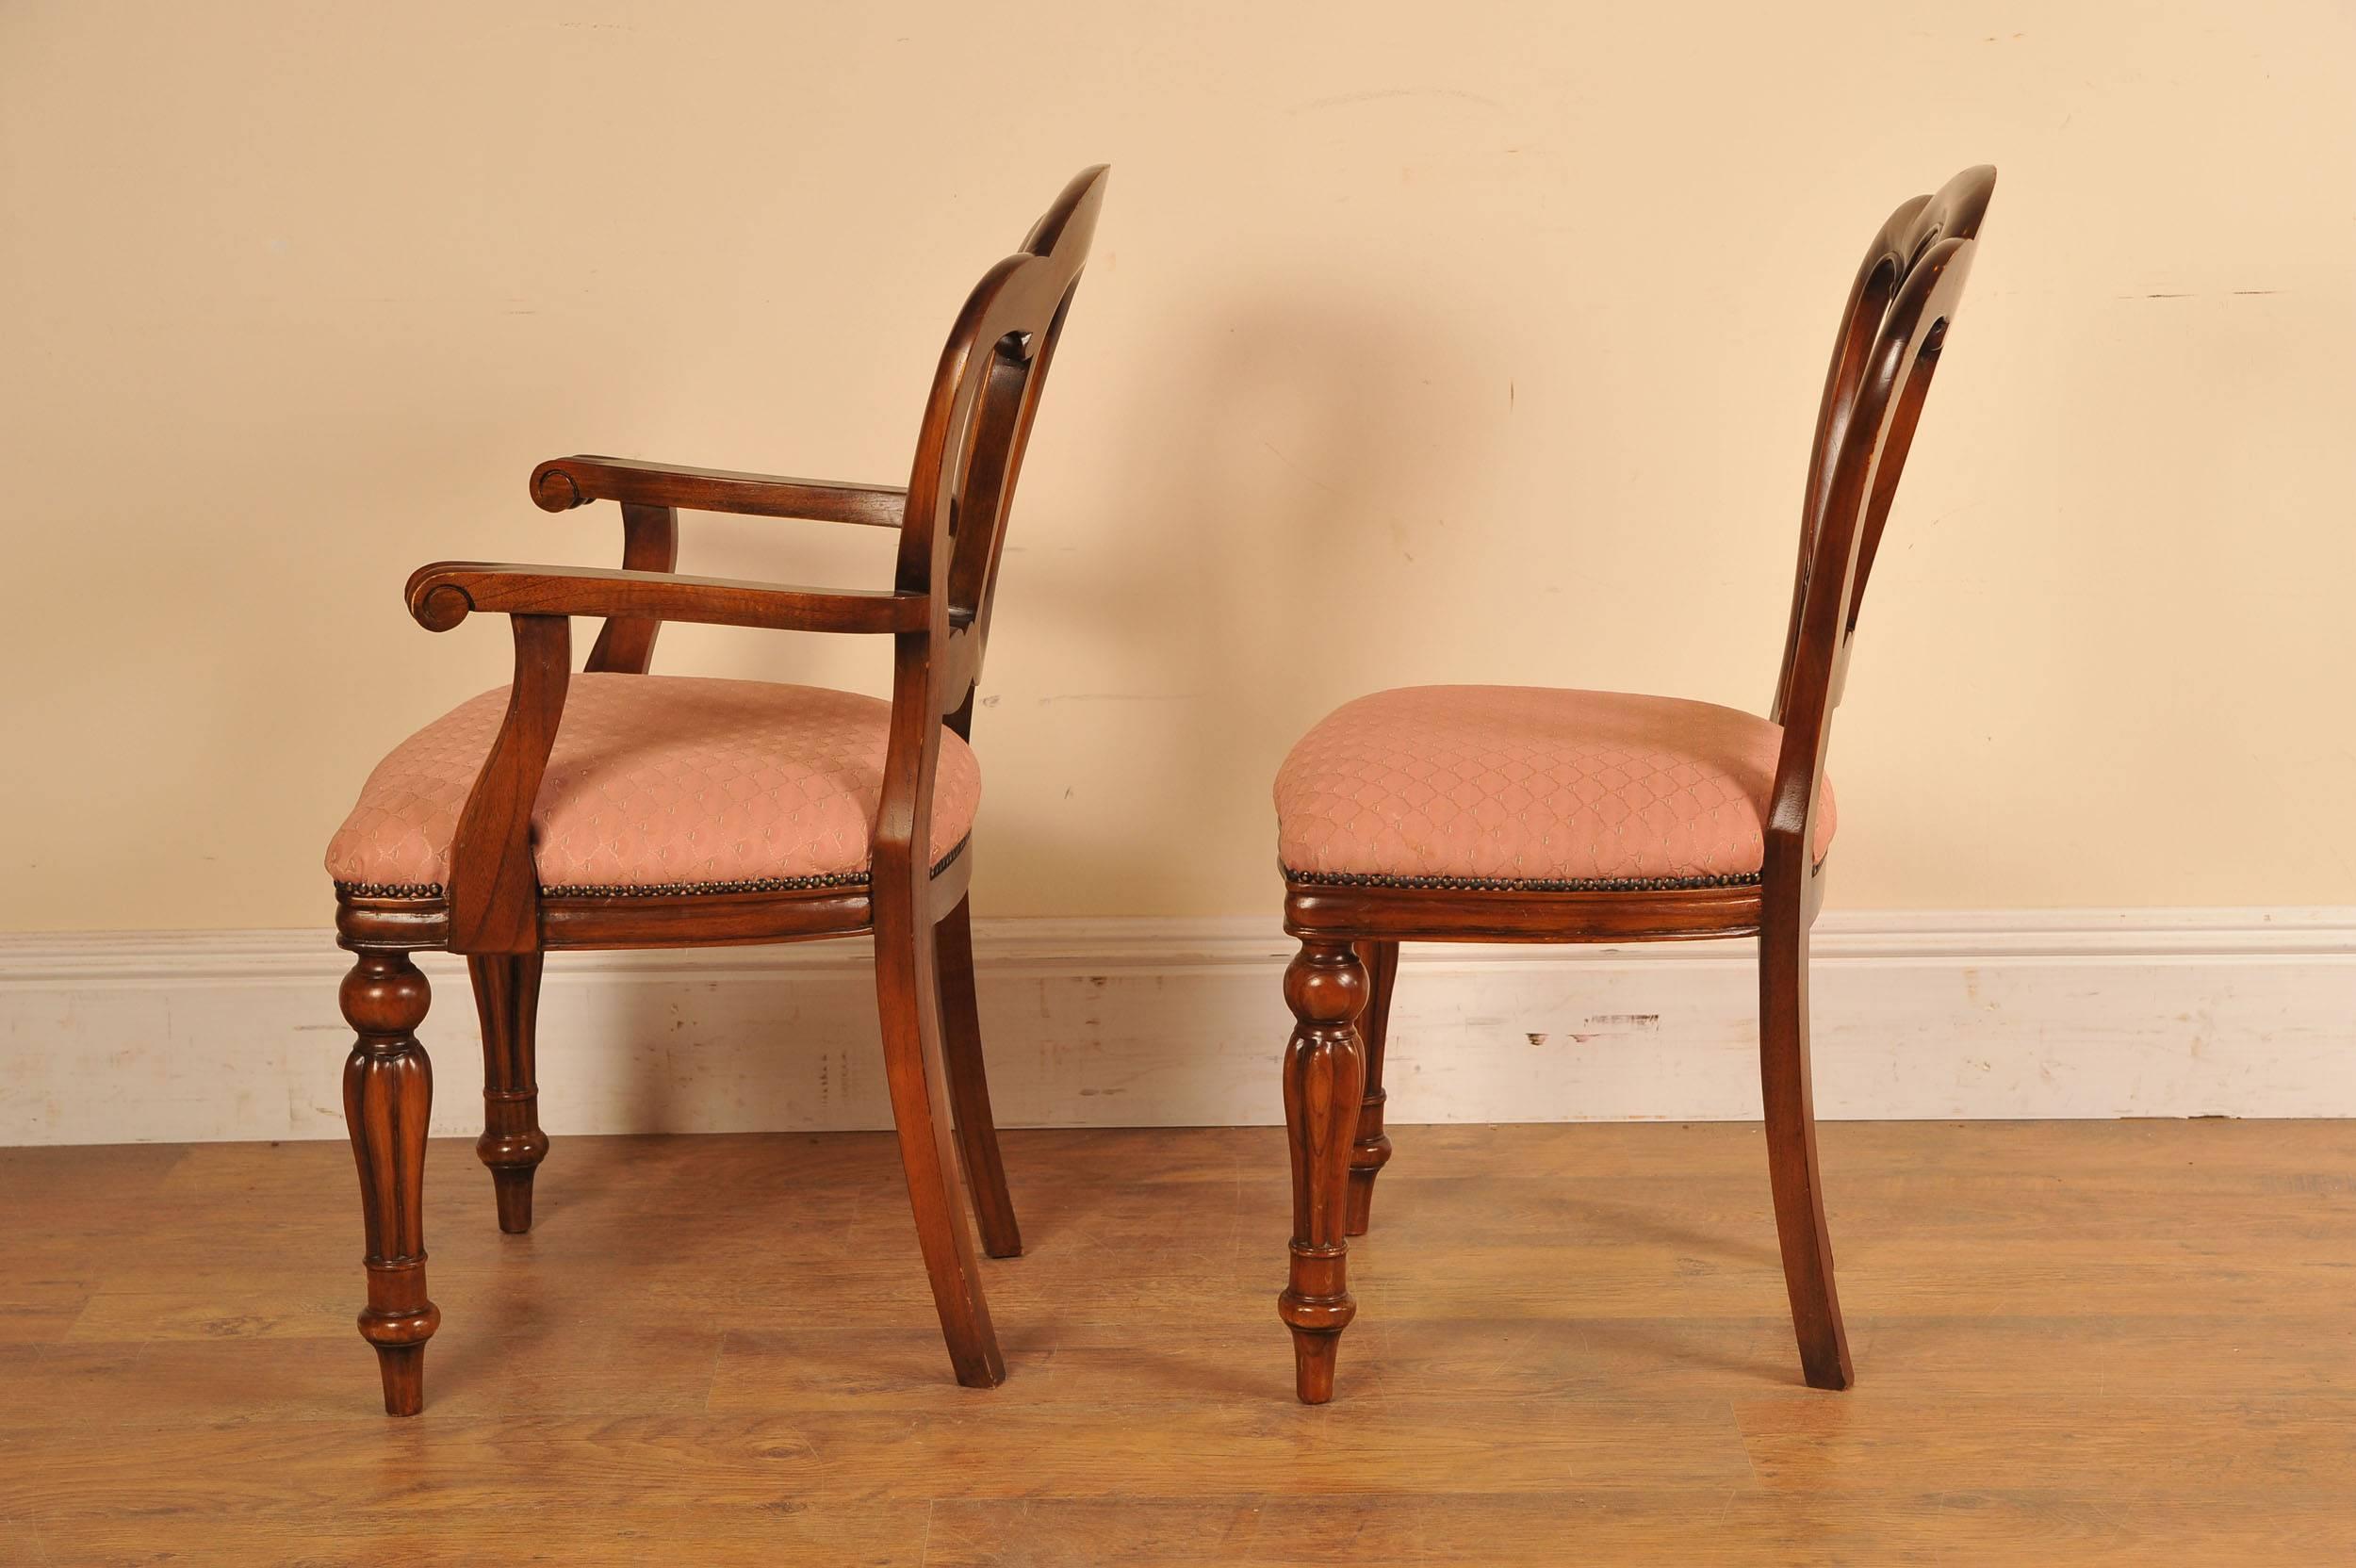 Come view this for yourself in our Herts showroom.
Classic set of six English Victorian style balloon back chairs.
Set consists of two armchairs and four side chairs.
Handcrafted from mahogany this gorgeous set are offered in great